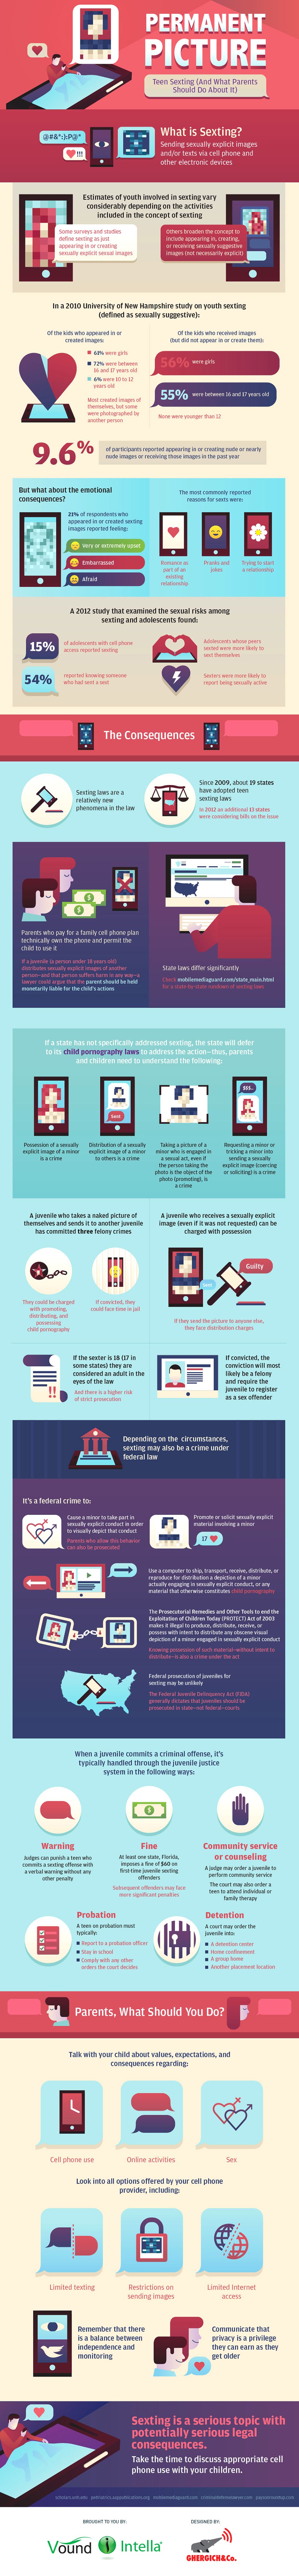 Permanent Picture: Teen Sexting and Parenting Tips to Protect Your Child #infographic